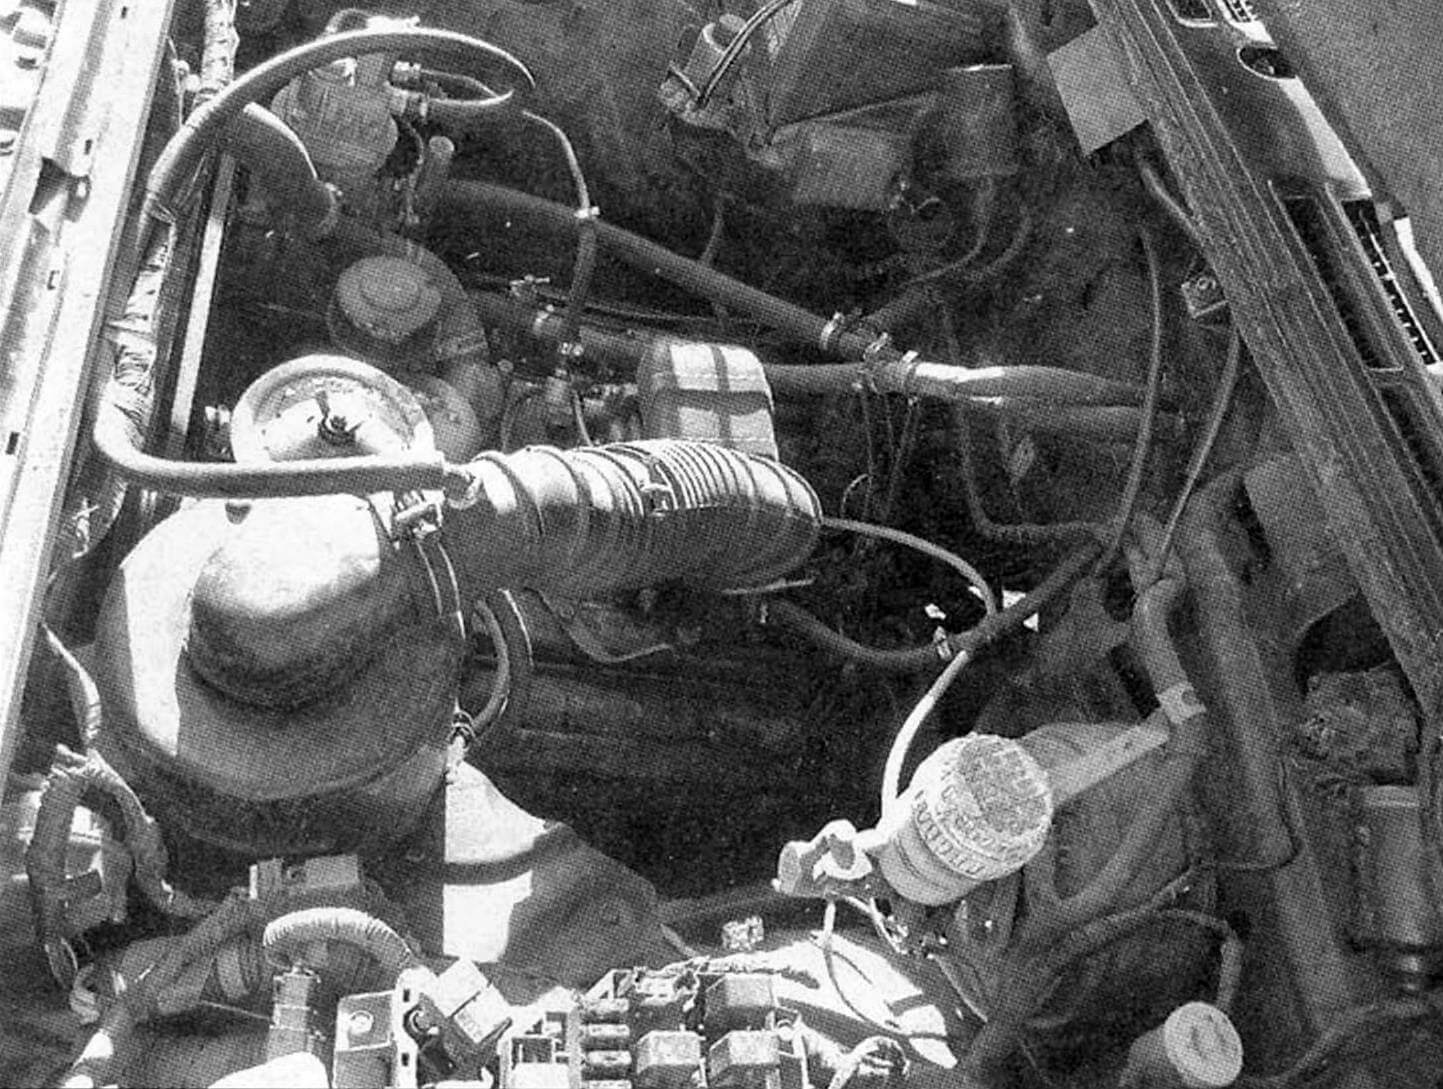 Under the hood of the Mitsubishi-Pajero there is now a GAZ-66 engine.